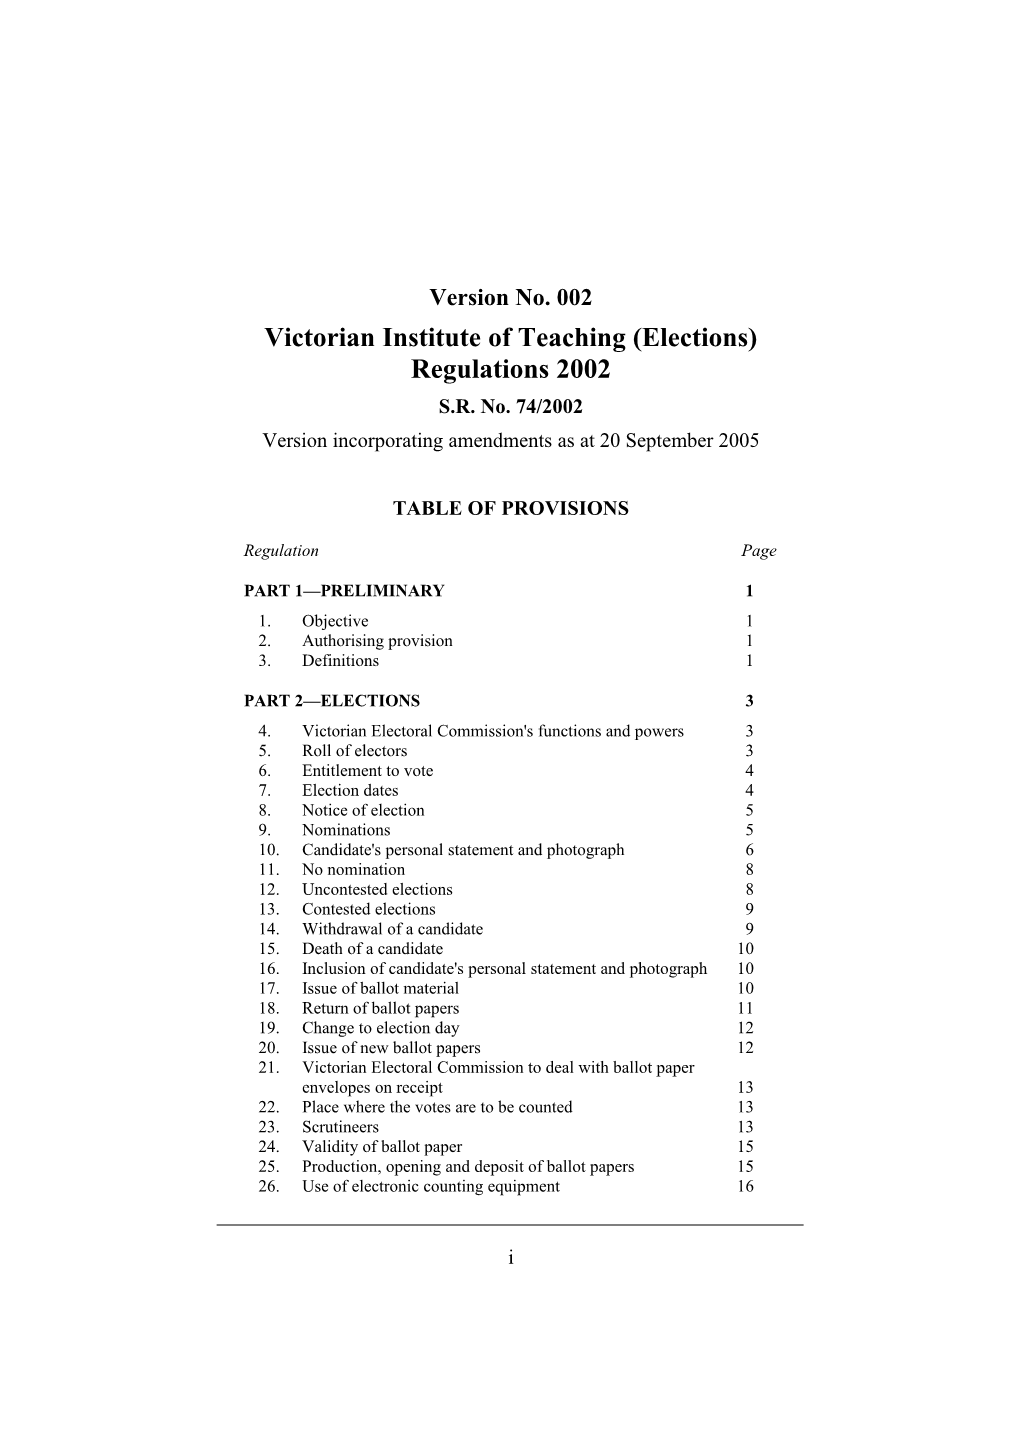 Victorian Institute of Teaching (Elections) Regulations 2002